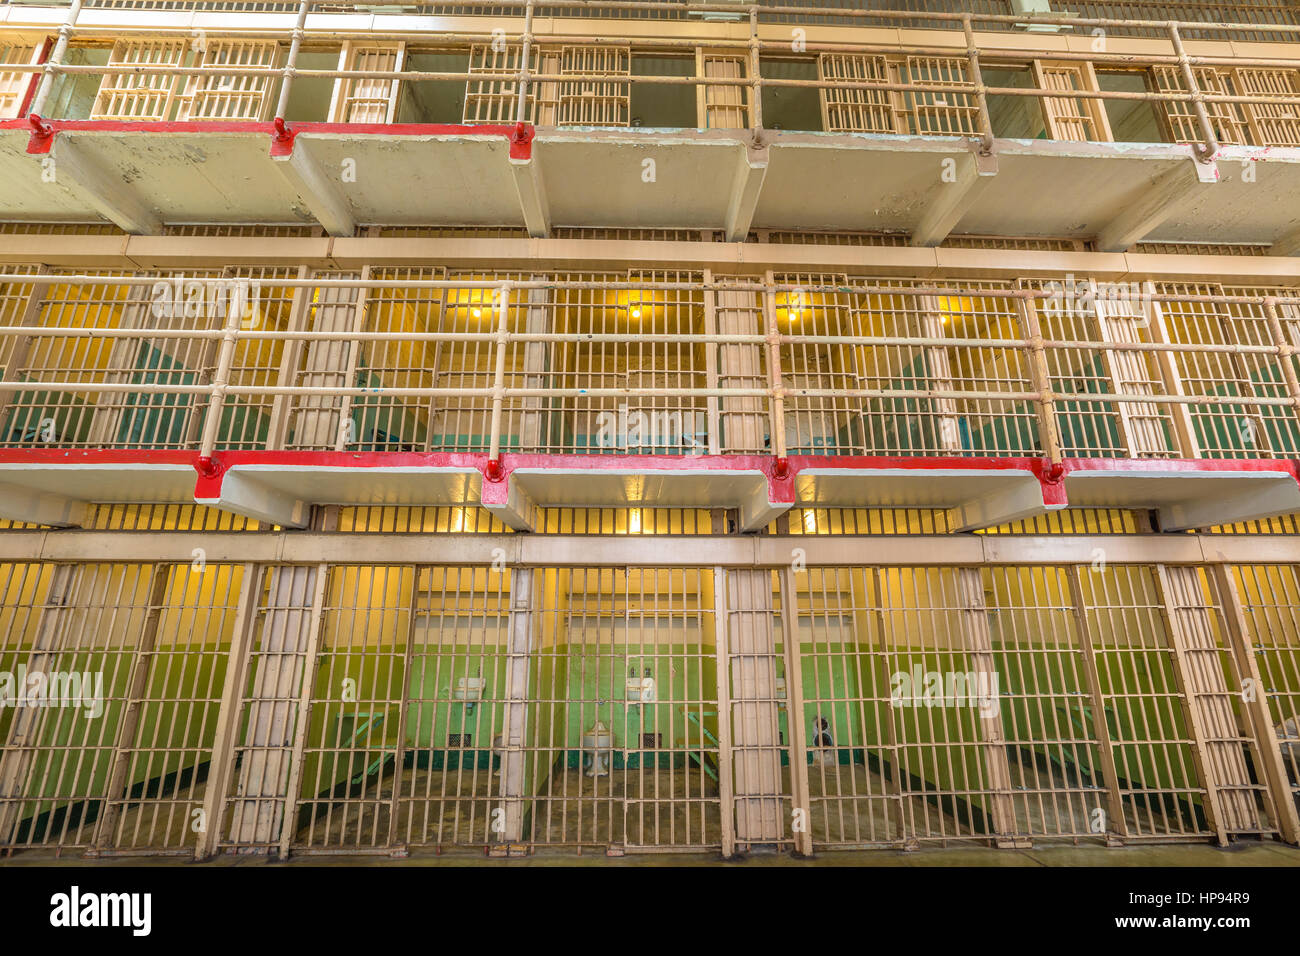 San Francisco, California, United States - August 14, 2016: interior of Alcatraz main room upper cells on three levels. All the cells are single for t Stock Photo